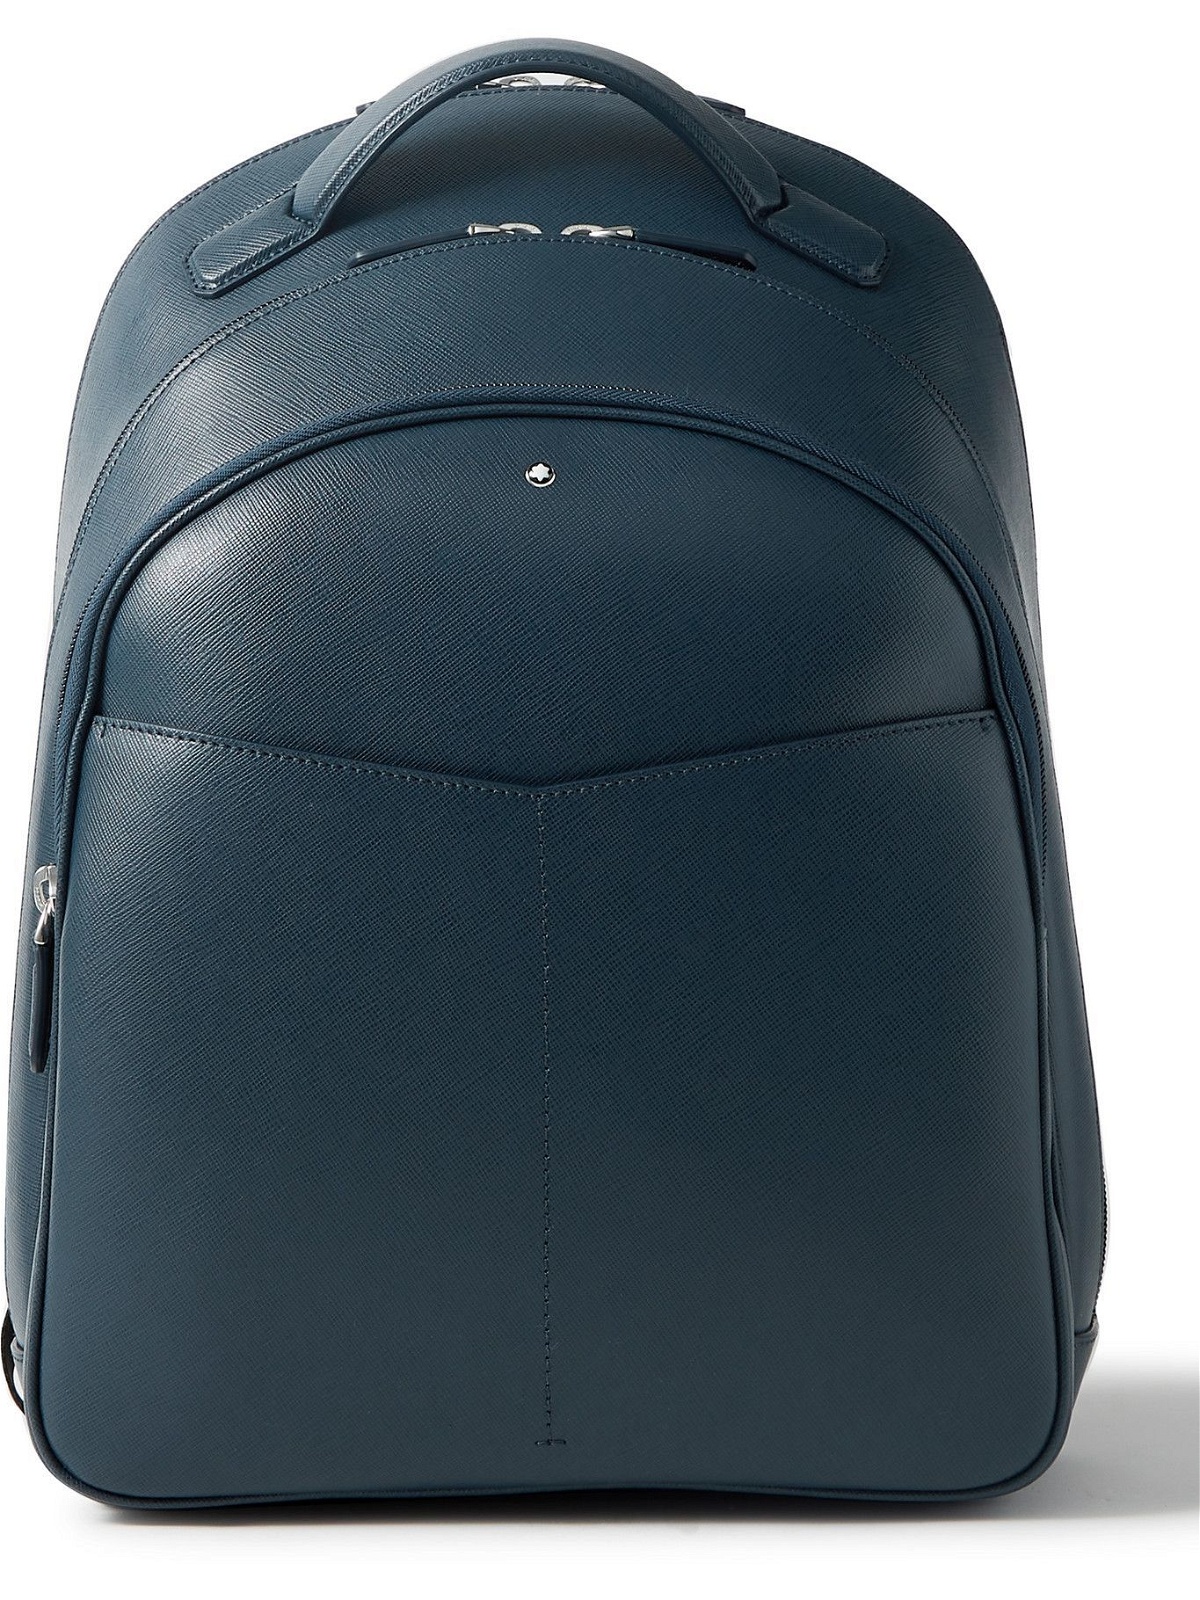 MONTBLANC - Sartorial Cross-Grain Leather Backpack Montblanc